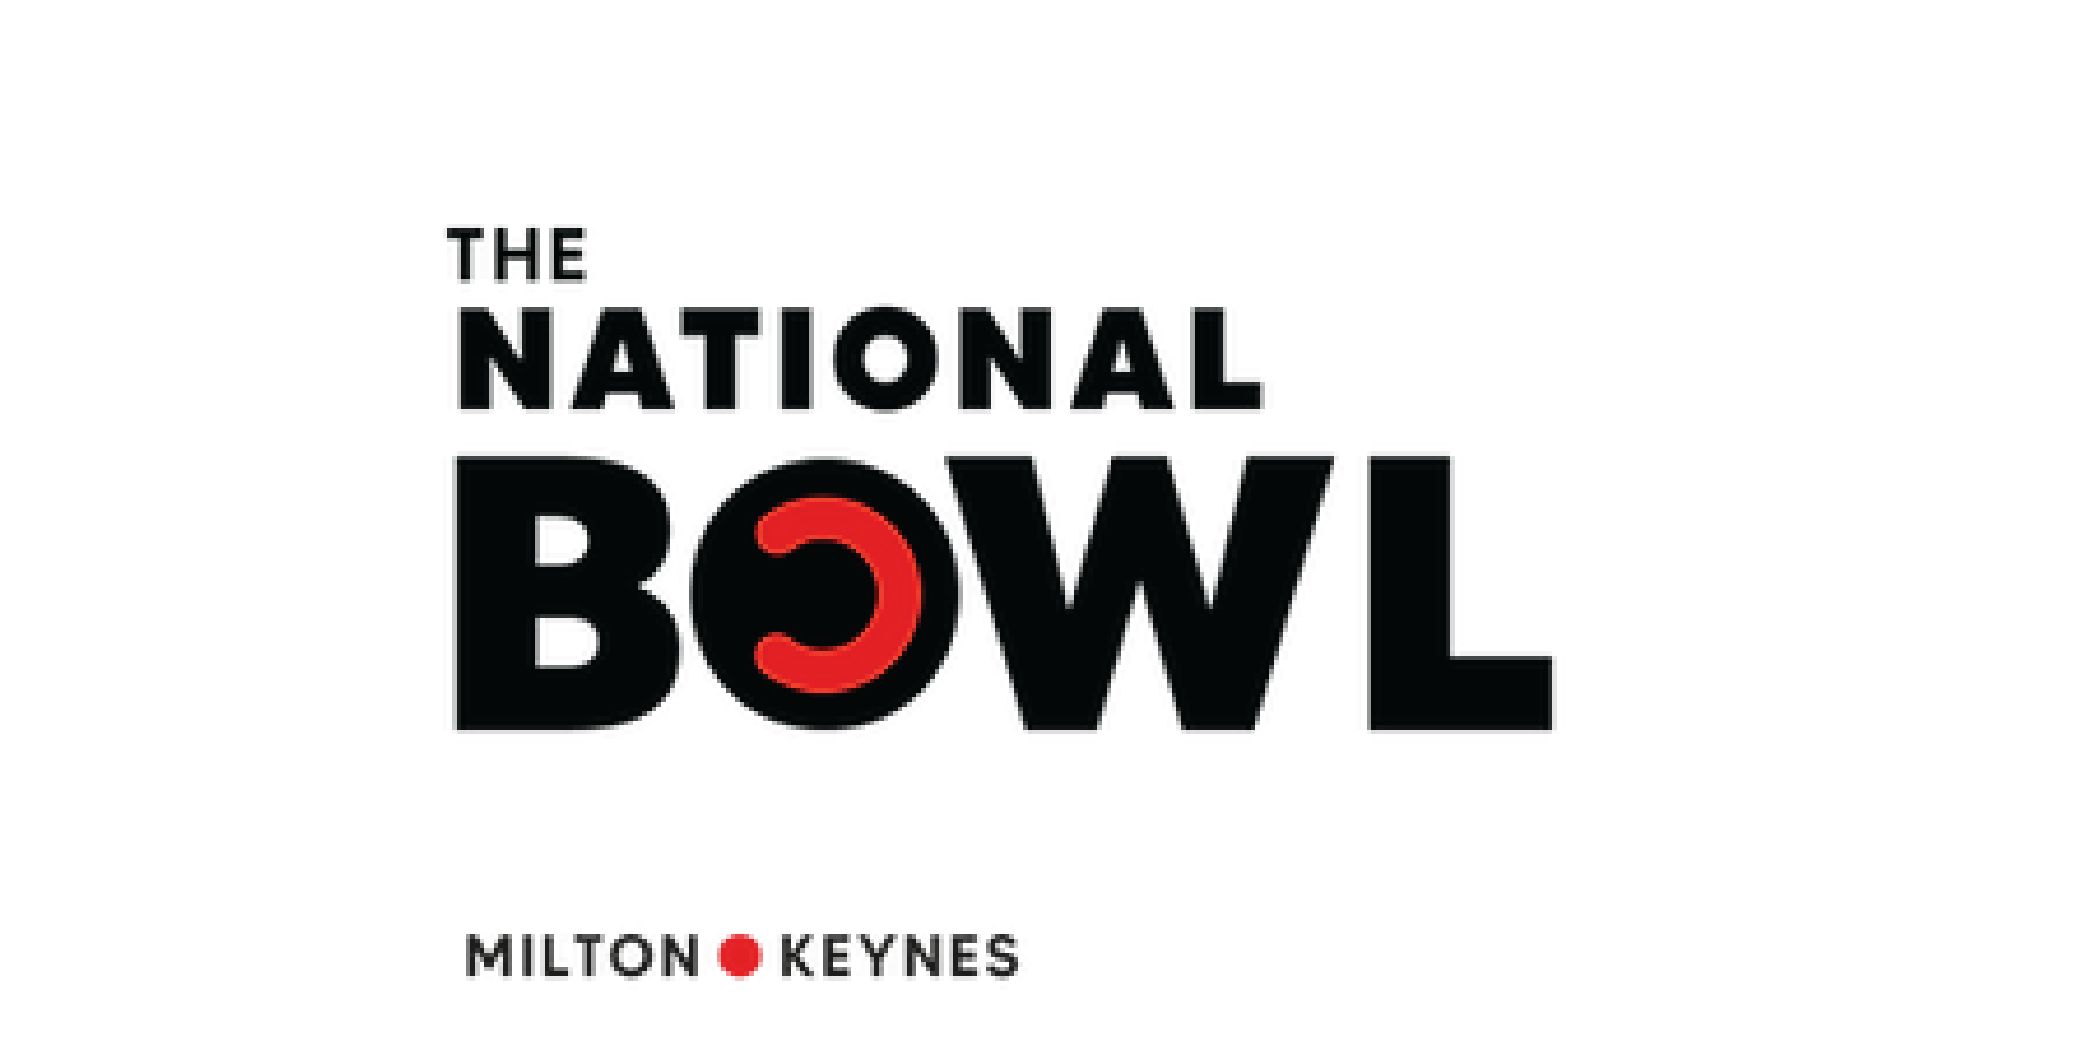 The National Bowl